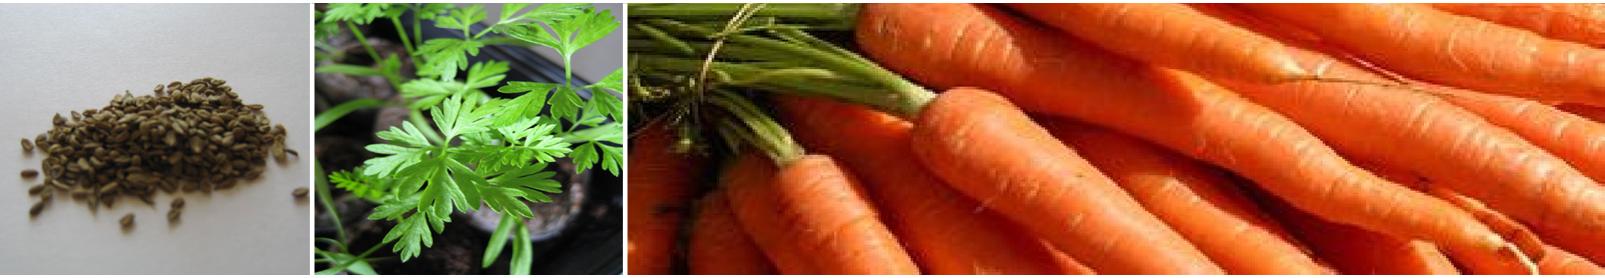 Carrot Growth Decoded: Royal Seed's Varieties Showcasing Seedling to Root